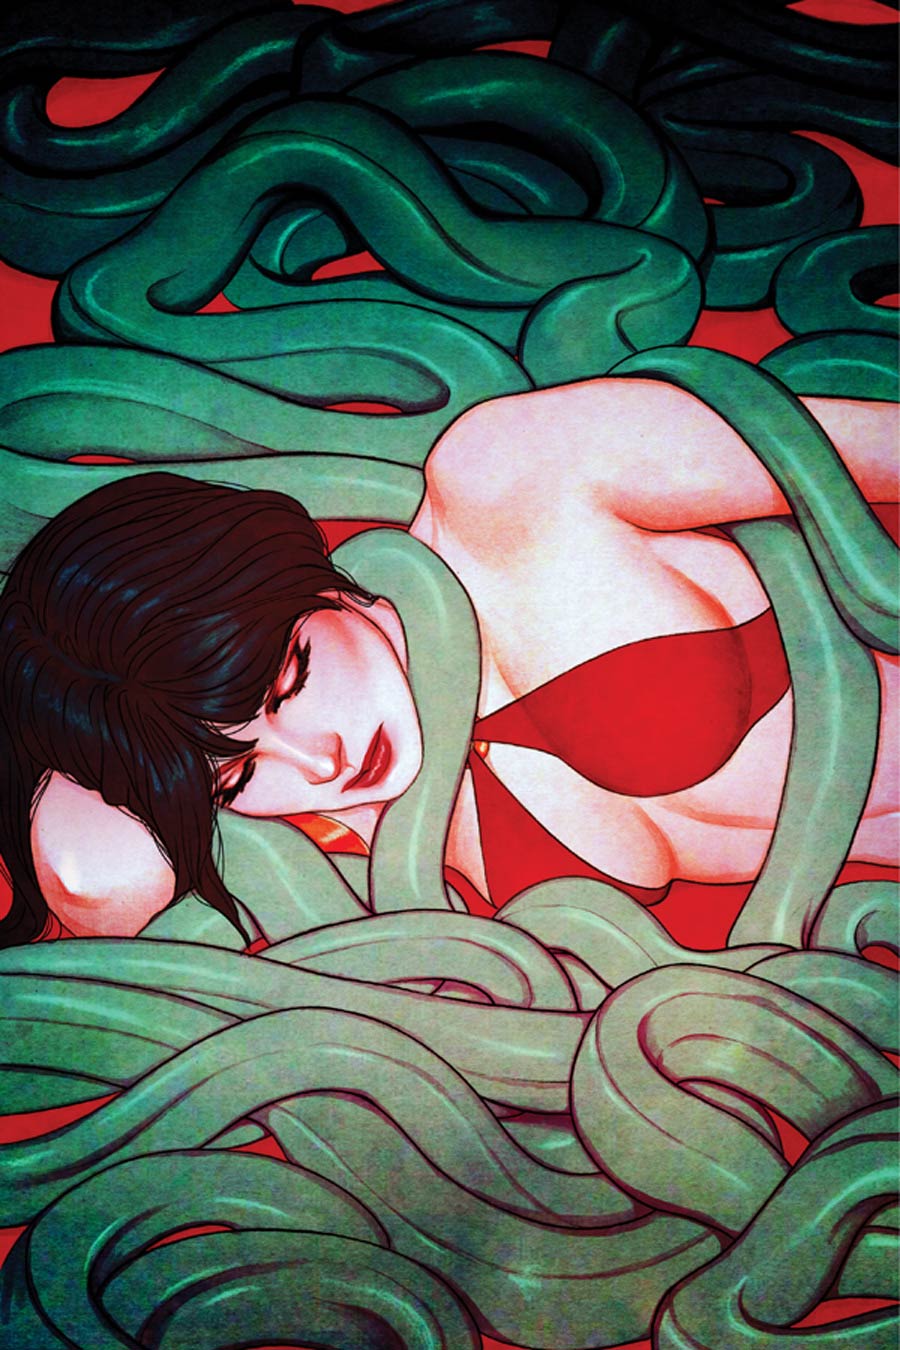 Vampirella Vol 5 #4 Cover E High–End Jenny Frison Virgin Art Ultra-Limited Variant Cover (ONLY 25 COPIES IN EXISTENCE!)